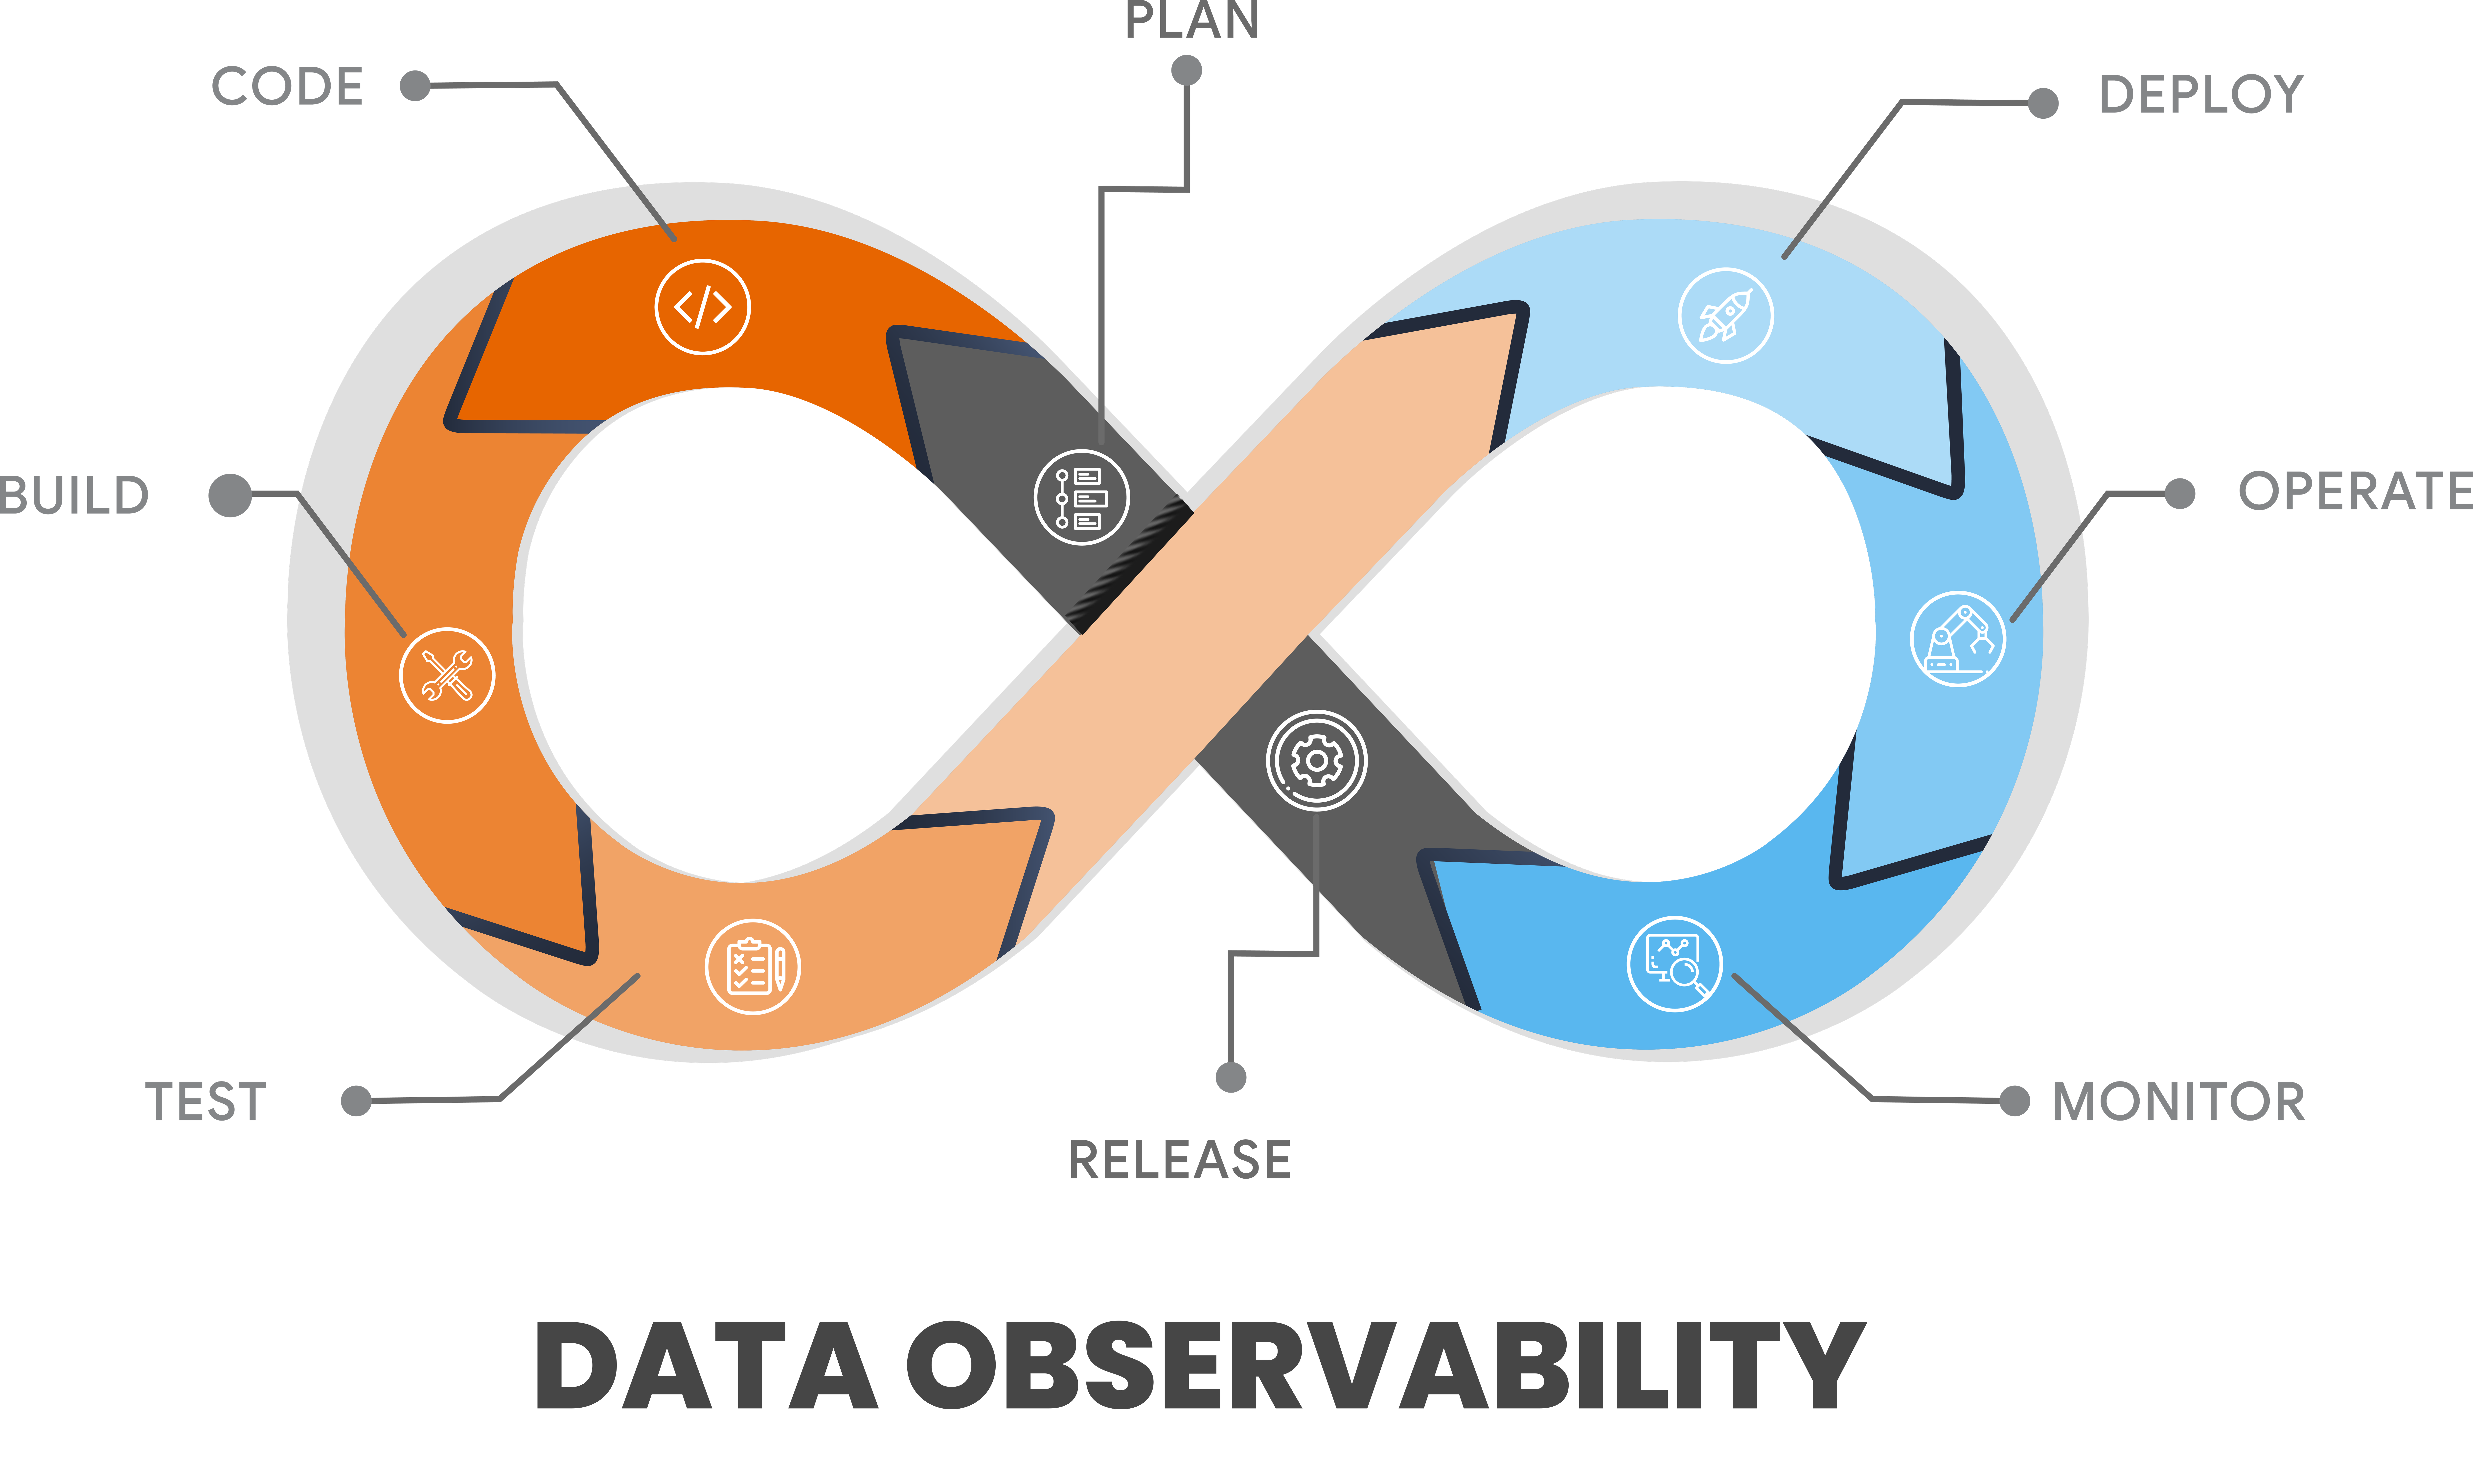 Illustrated graphic showing the DataOps Framework and Data Observability loop phases. 